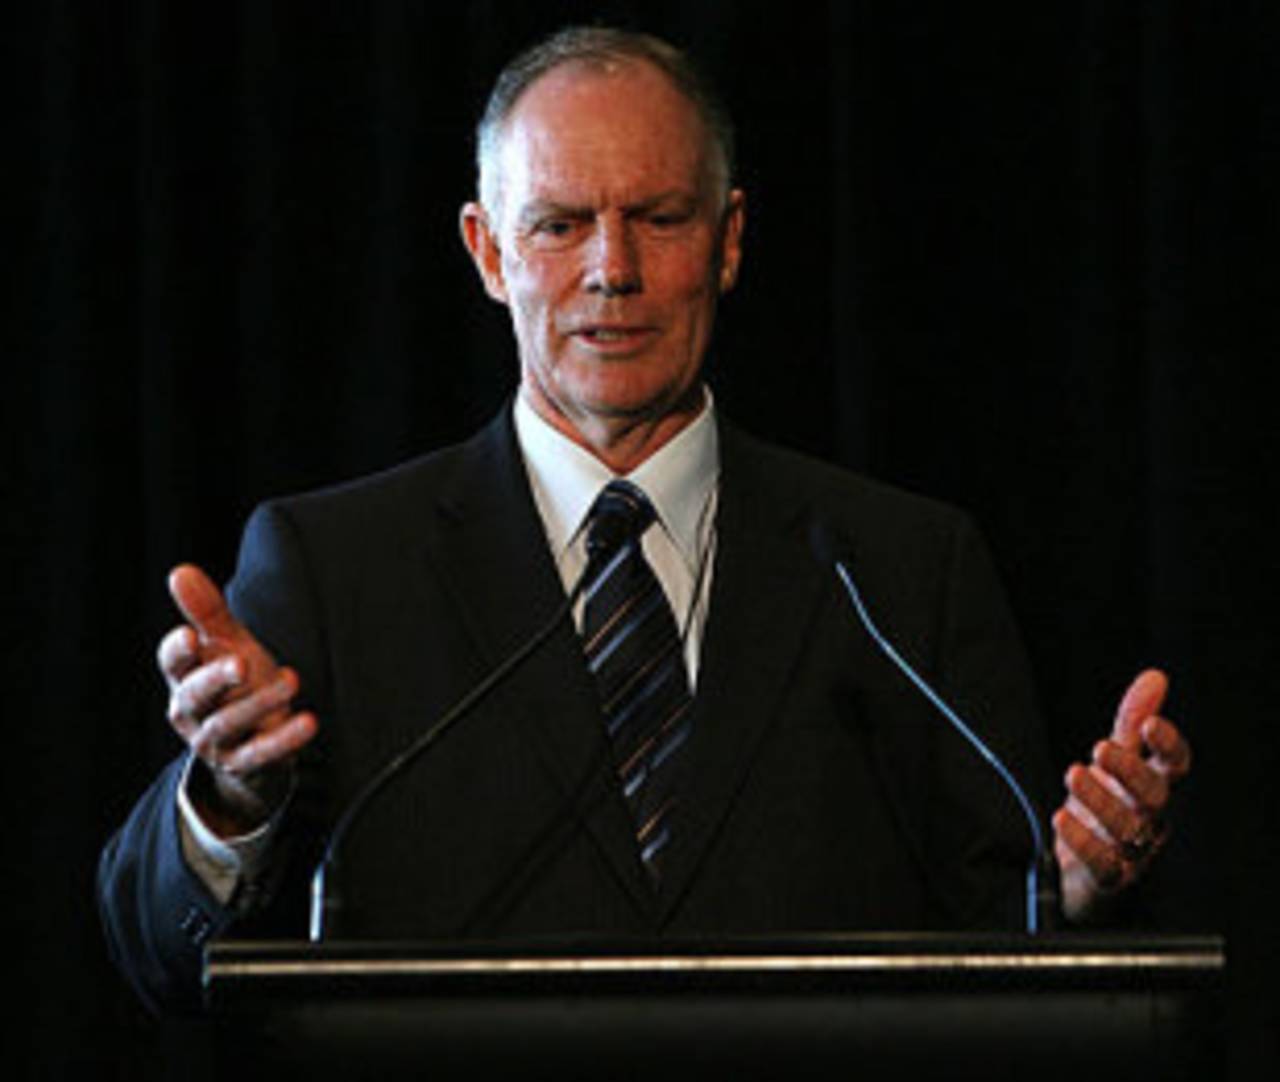 Greg Chappell: "I was honoured and flattered by the approach but I have declined the invitation."&nbsp;&nbsp;&bull;&nbsp;&nbsp;Getty Images